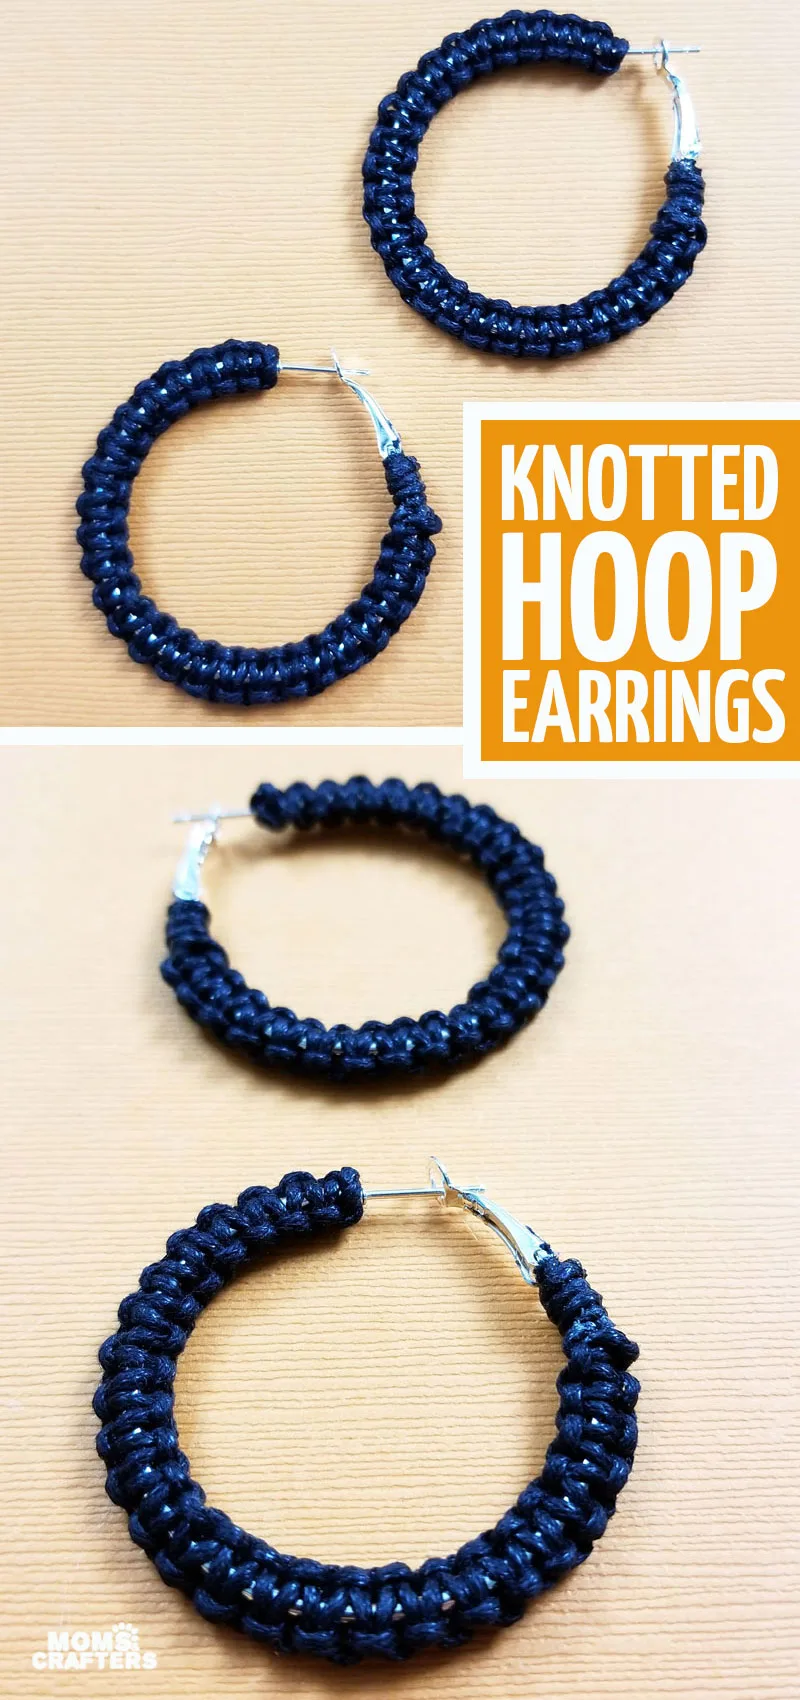 These DIY hoop earrings are so cool - and a fun jewelry making craft for beginners! This DIY jewelry project is perfect for teens and tweens.